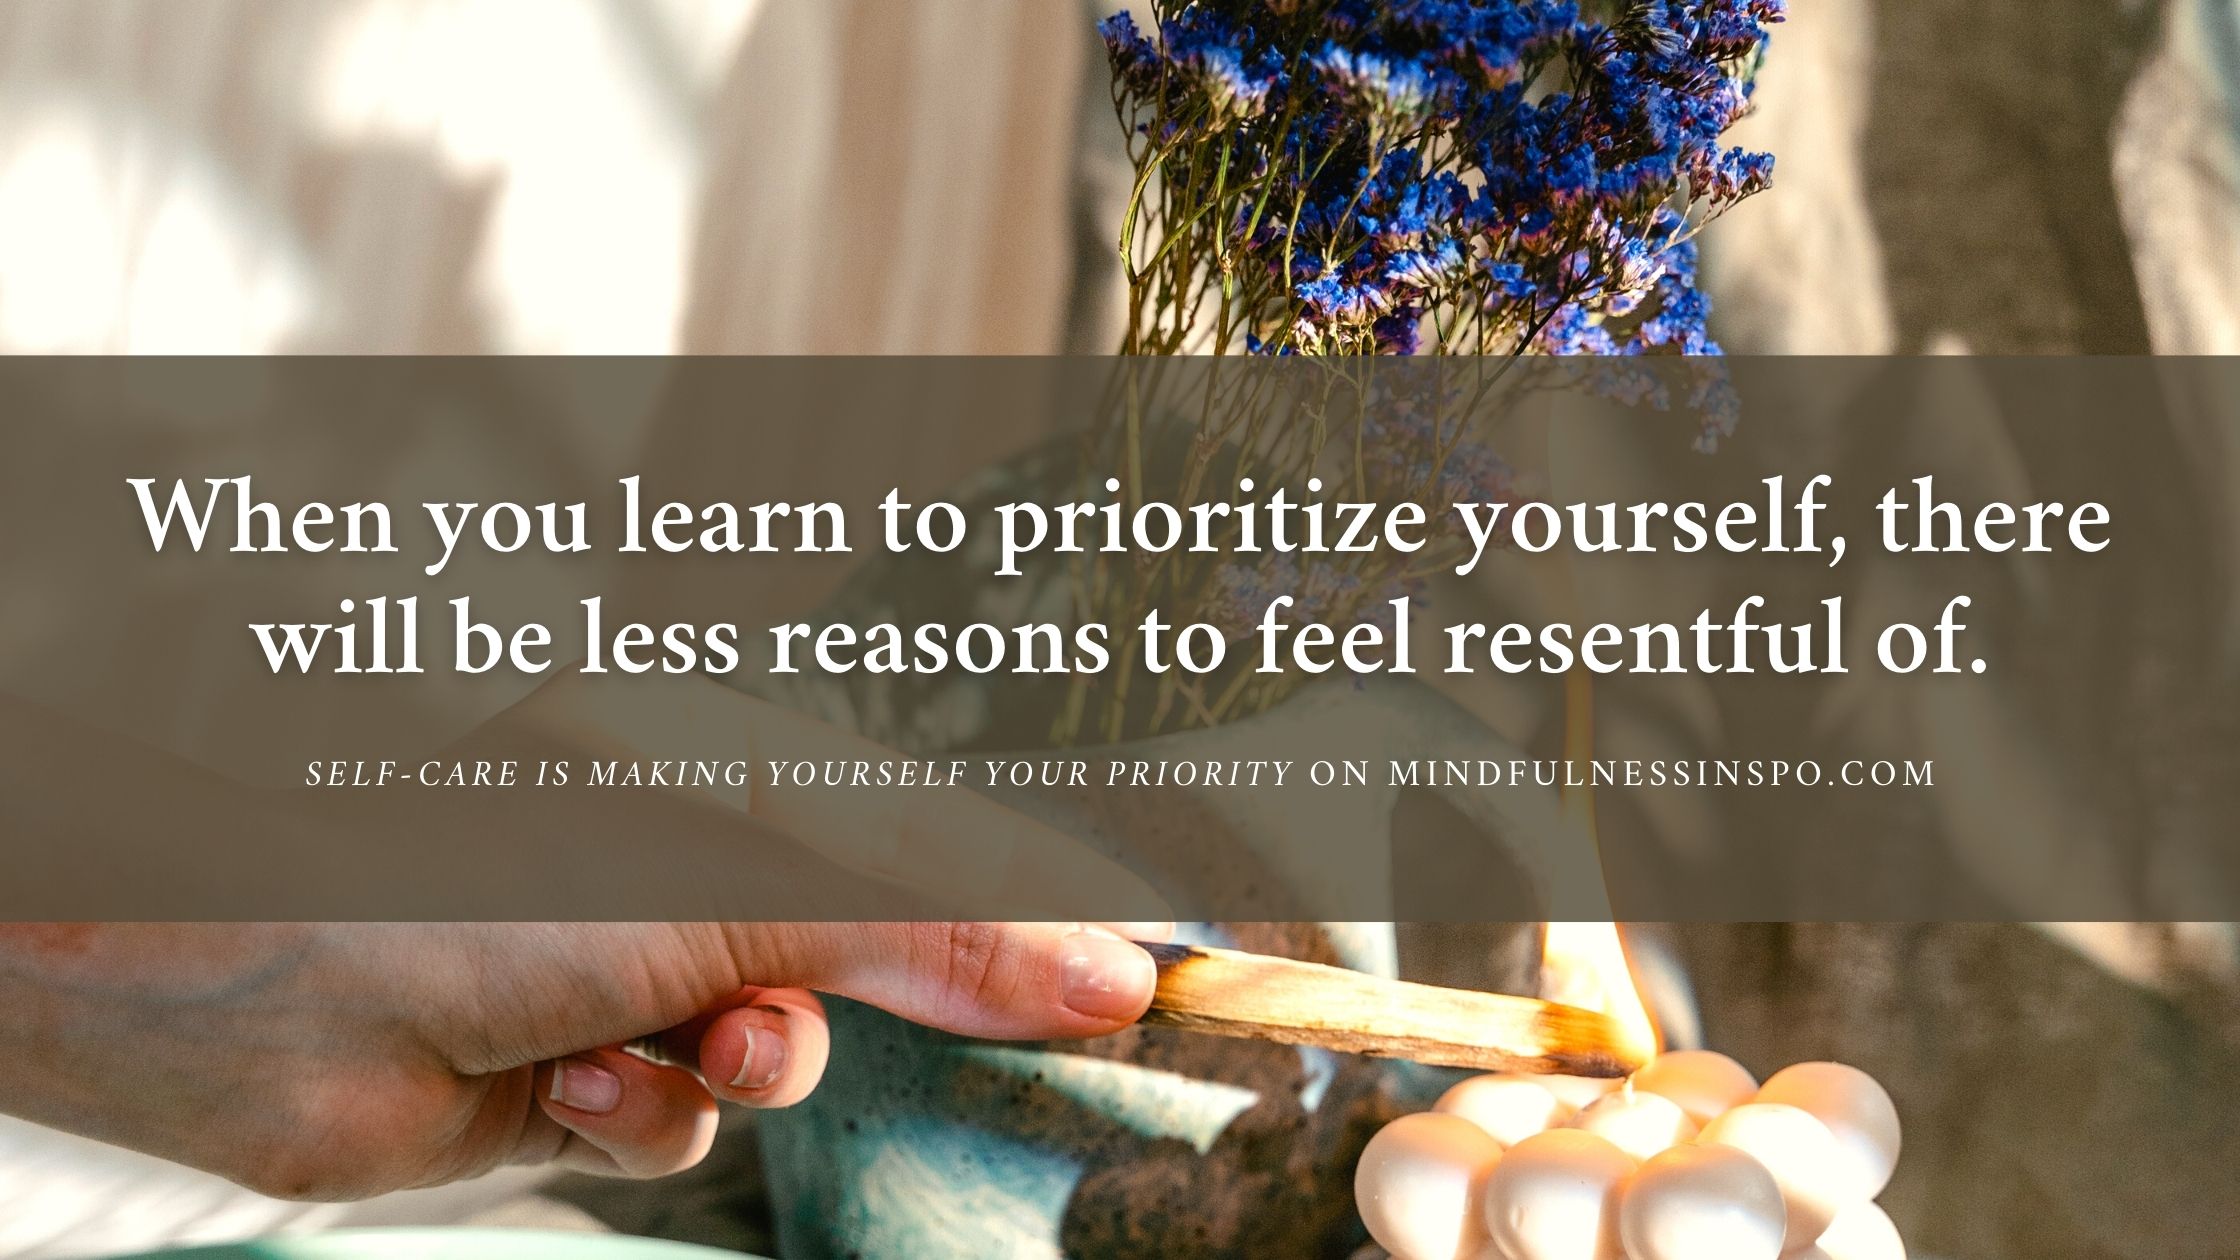 blogpost image. put yourself first quotes: when you learn to prioritize yourself, there will be less reasons to feel resentful of. self-care is making yourself your priority on mindfulnessinspo.com